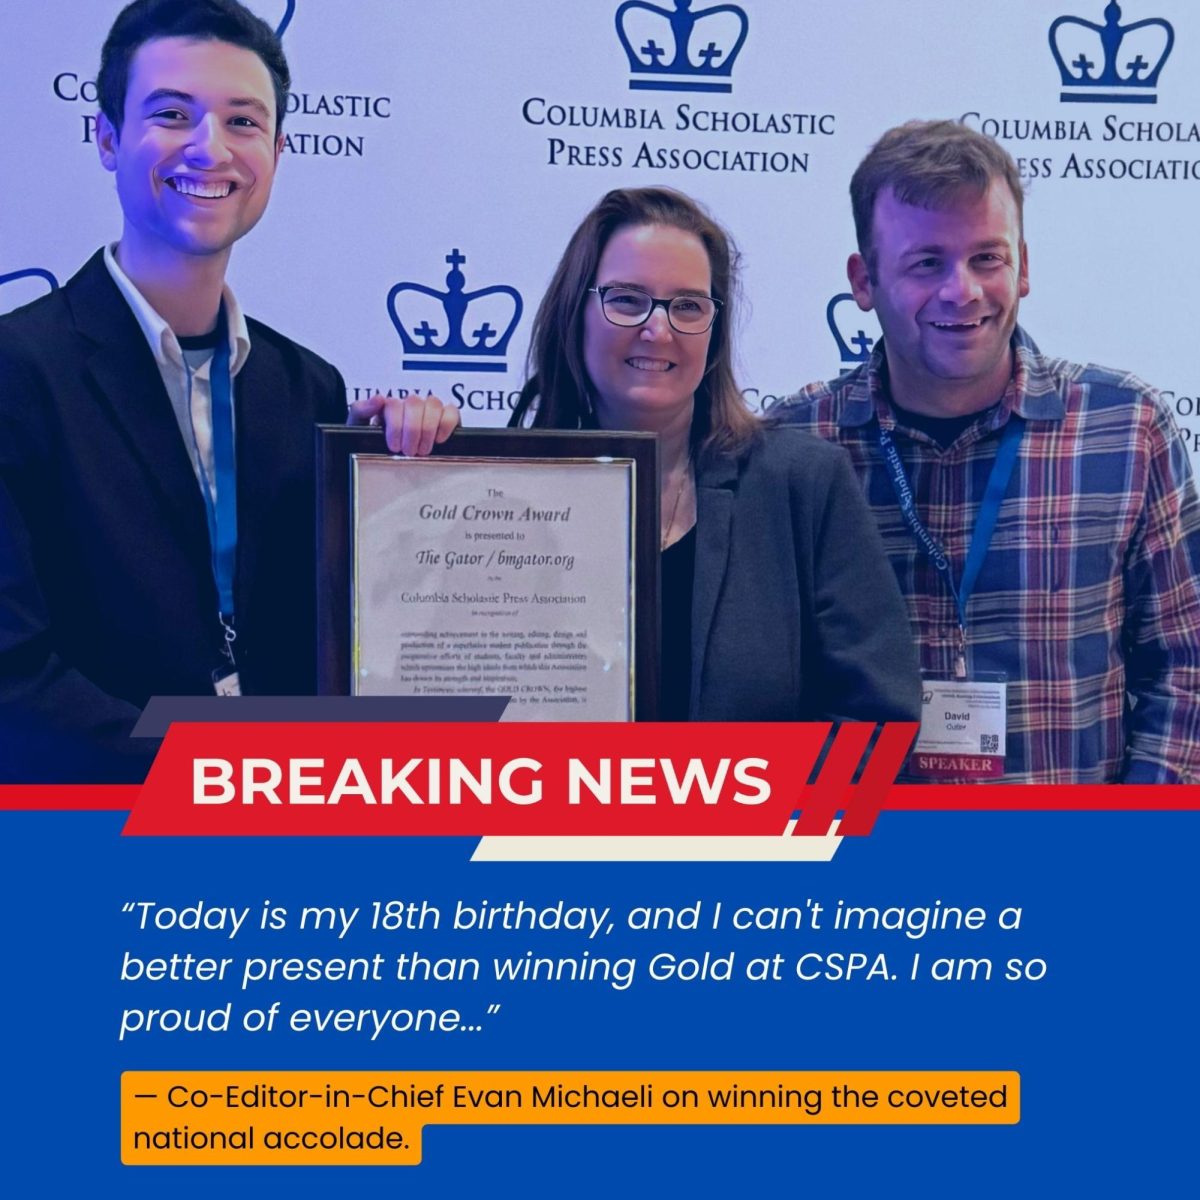 Co-Editor-in-Chief Evan Michaeli 23 poses with CSPA Director  Jennifer Bensko Ha and Adviser David Cutler upon receiving the Gold Crown. Illustration created with Canva.